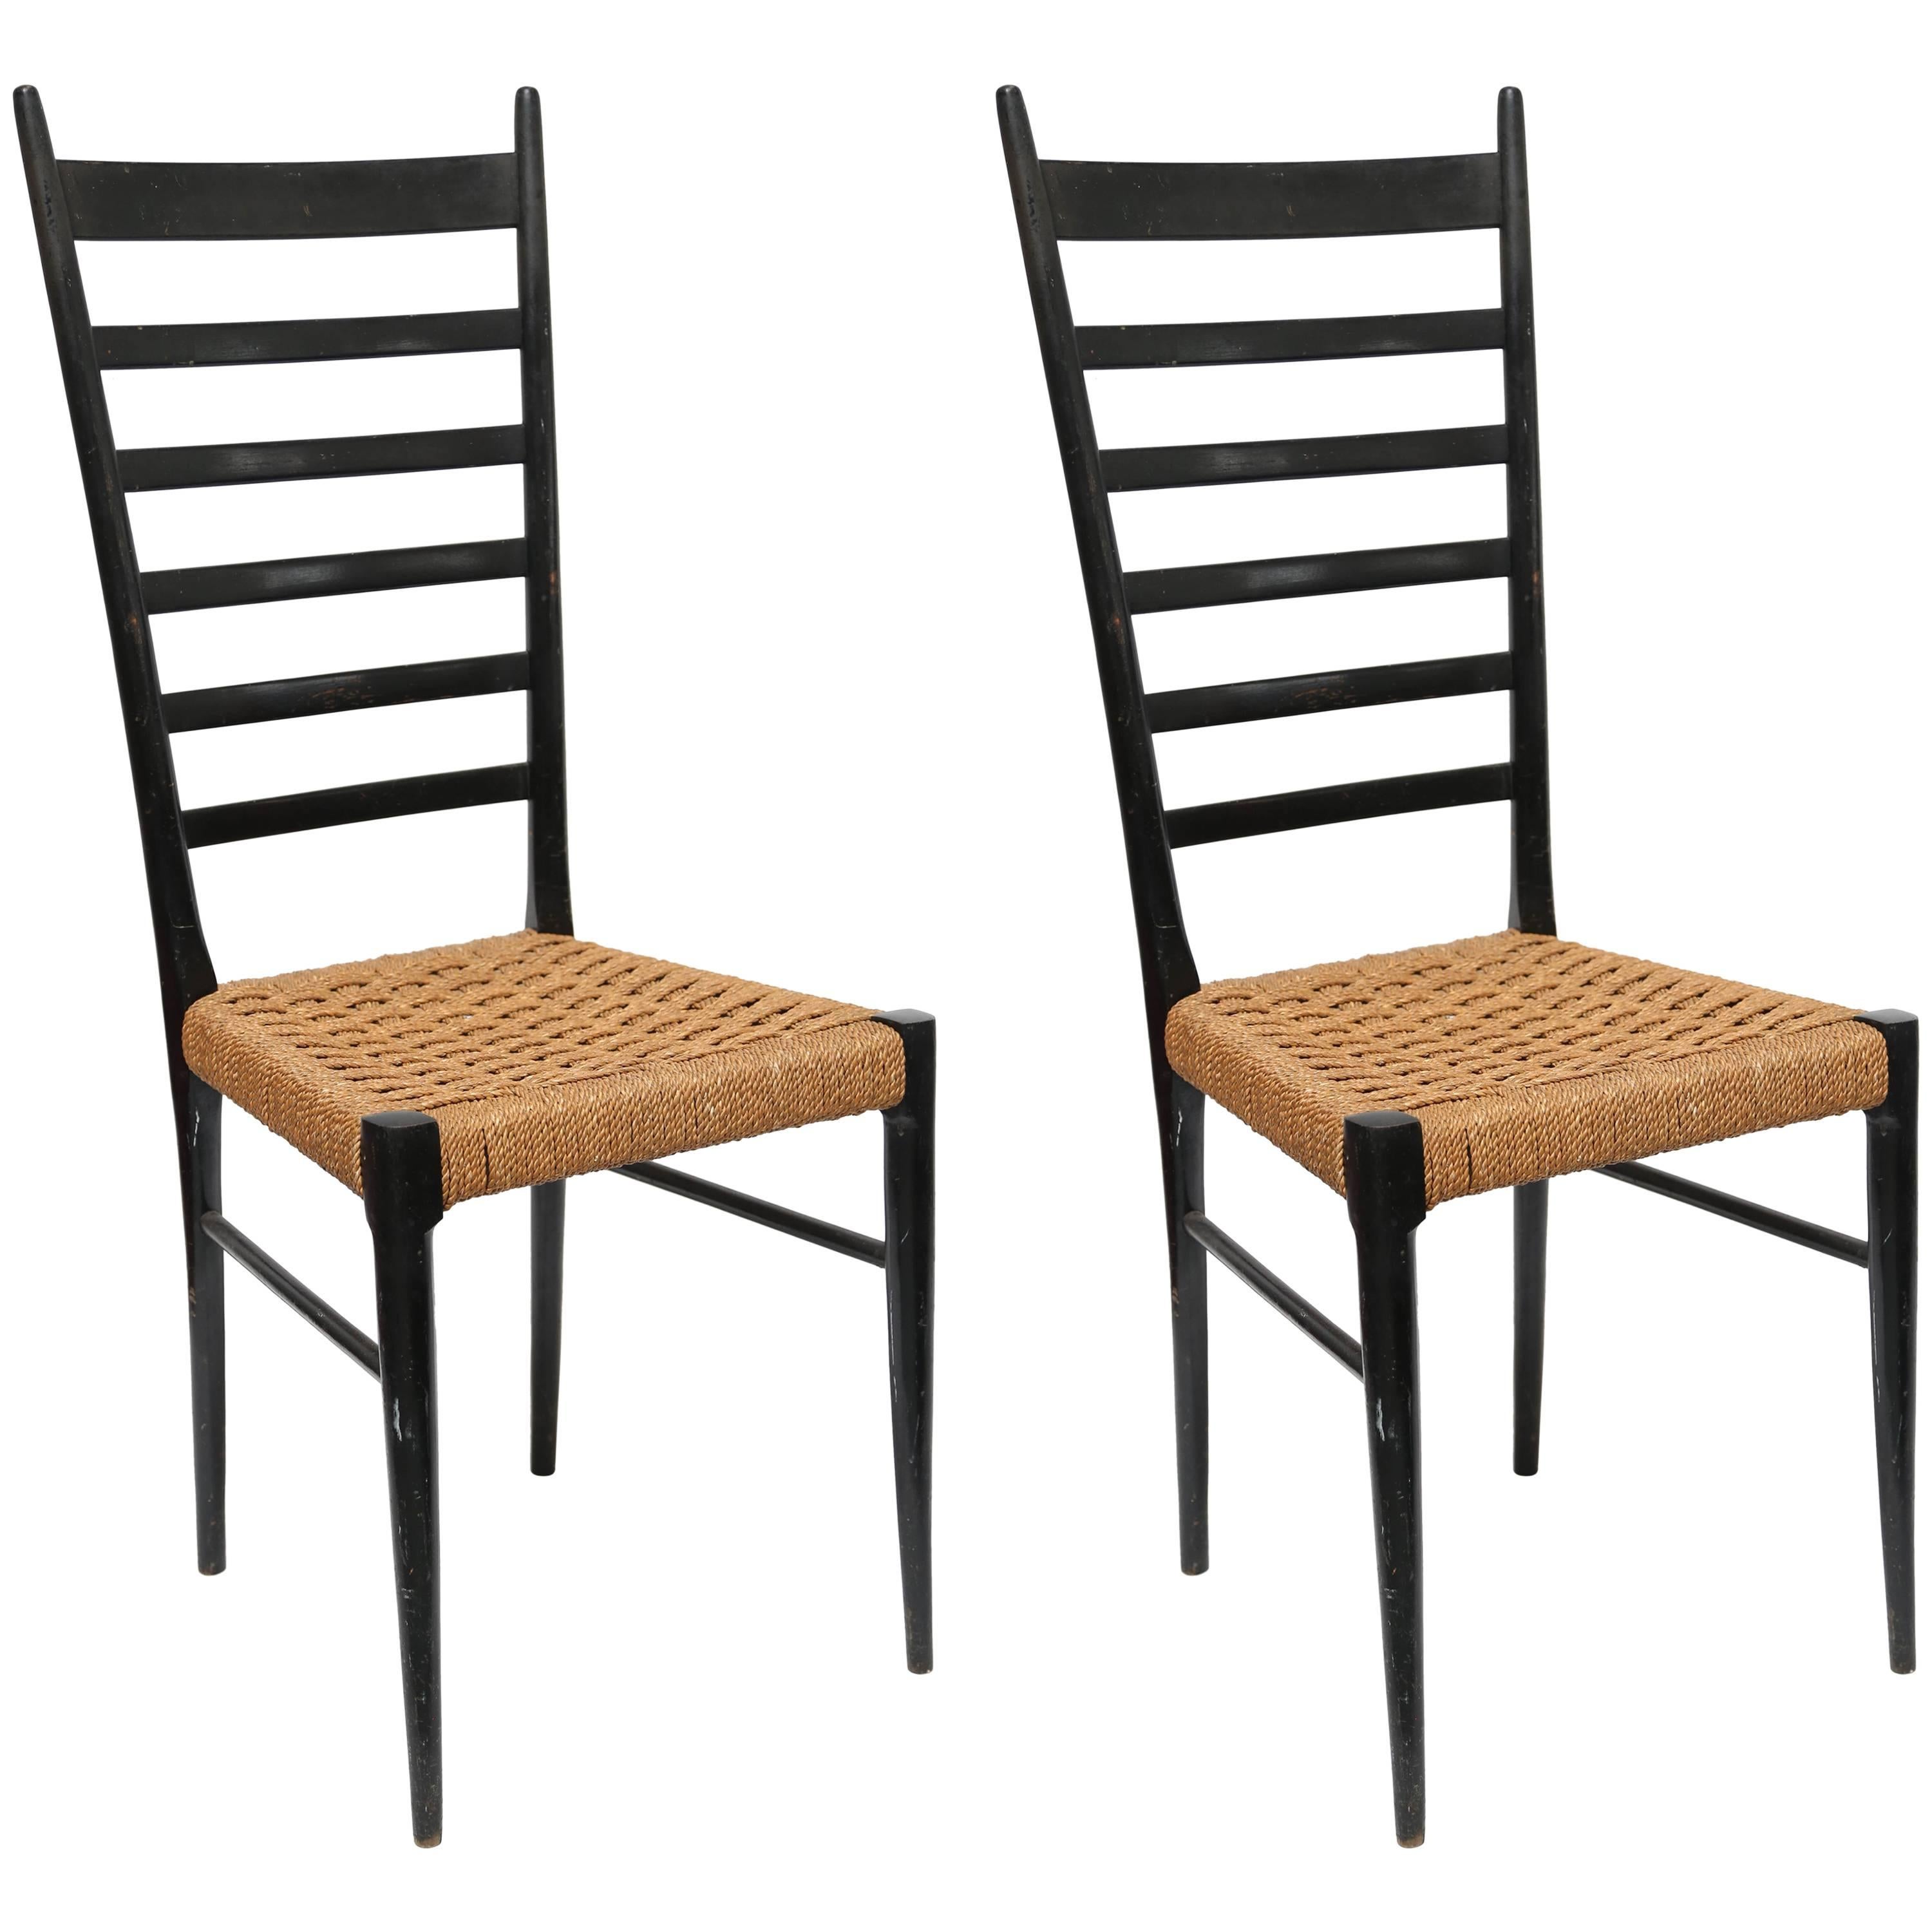 Pair of Gio Ponti Ladder Back Chairs, Italy, 1950s